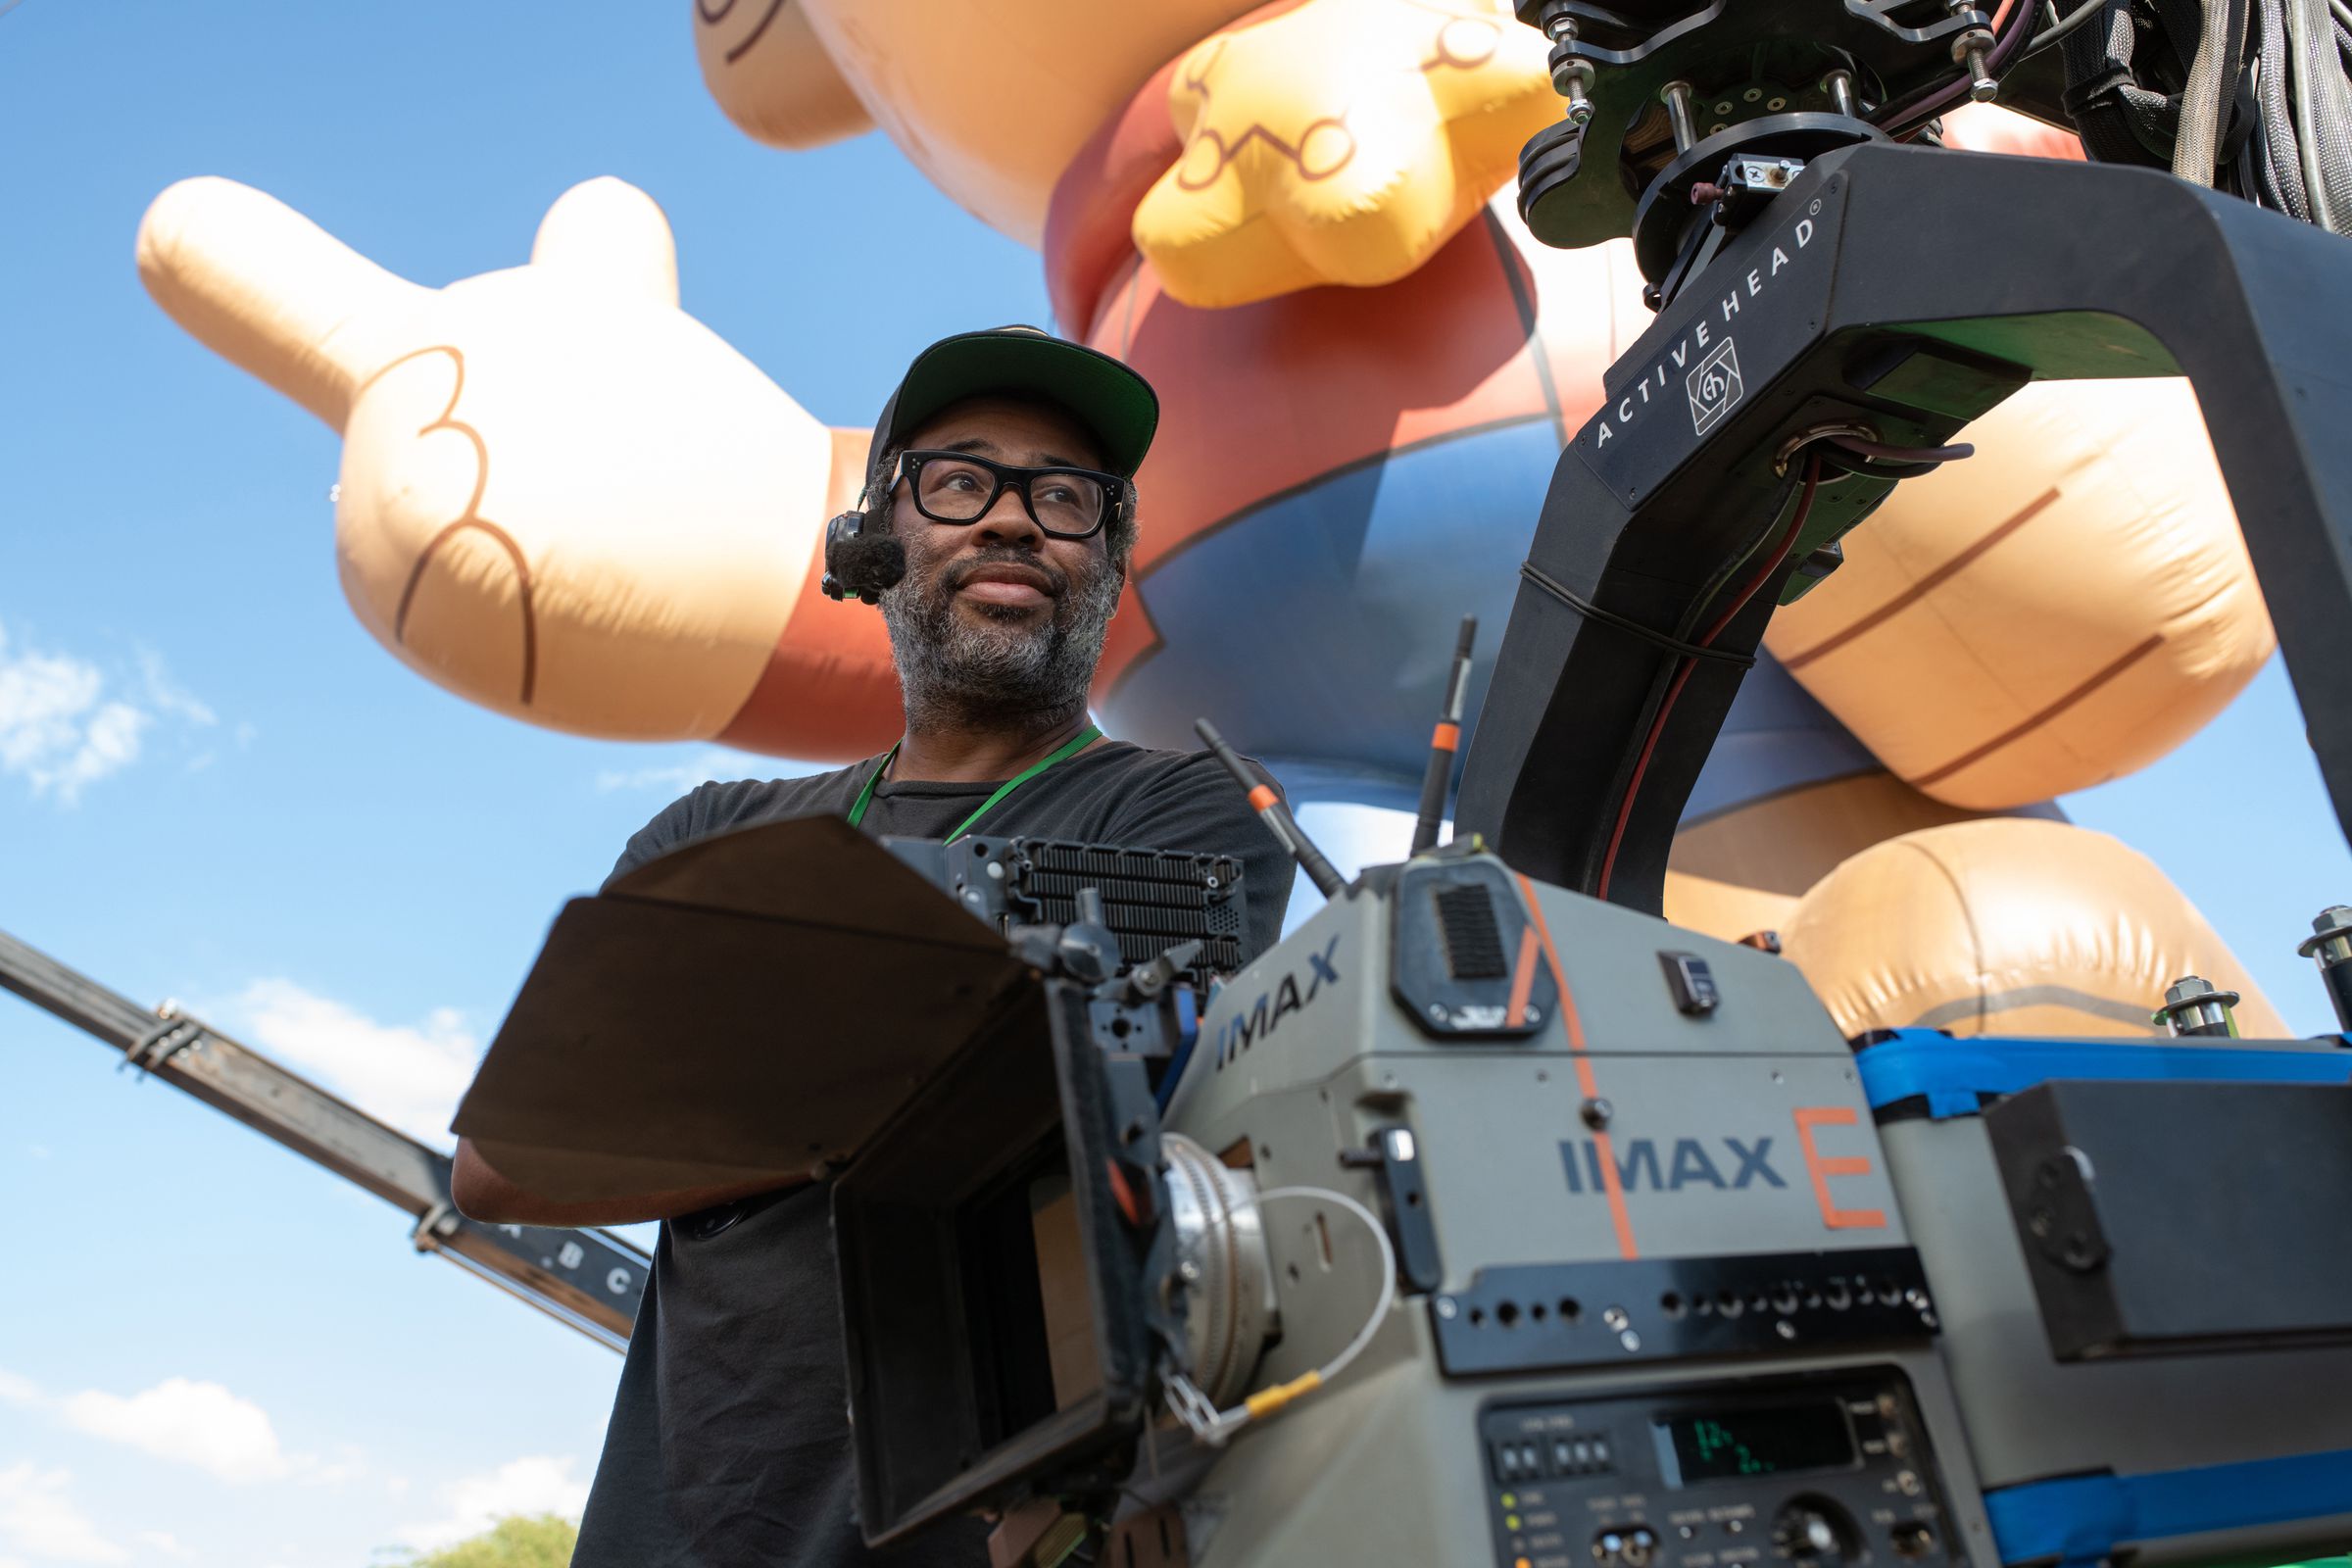 Jordan Peele on the set of Nope standing behind an IMAX camera, and in front of a massive, inflatable cartoon cowboy.